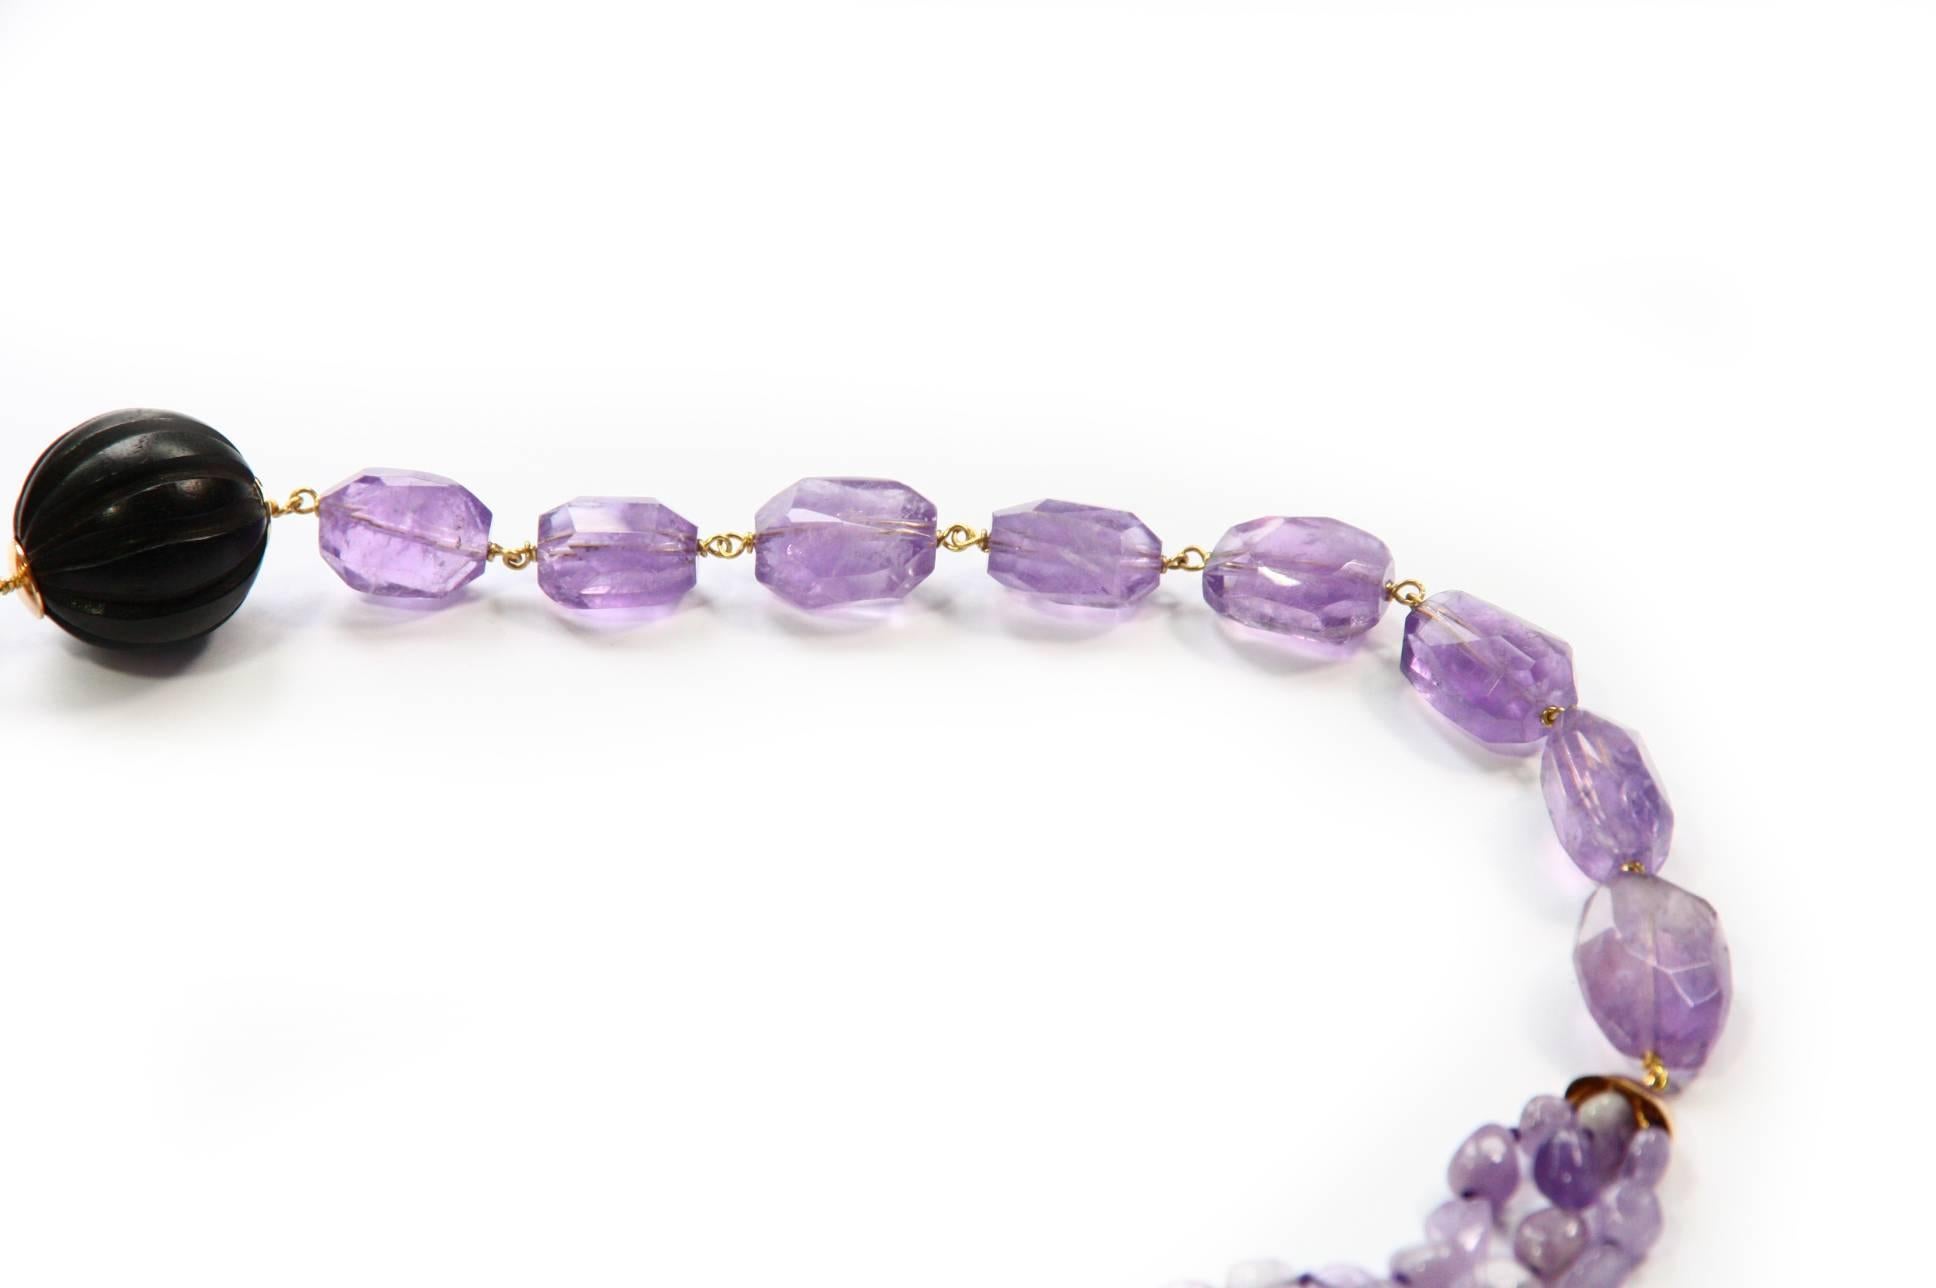 Long necklace different kind of Amethyst carved Ebony pearls Carved Jade 18kt Gold gr.10,20.
This series named half half you can wear in different way moving it on your neck.
All Giulia Colussi jewelry is new and has never been previously owned or